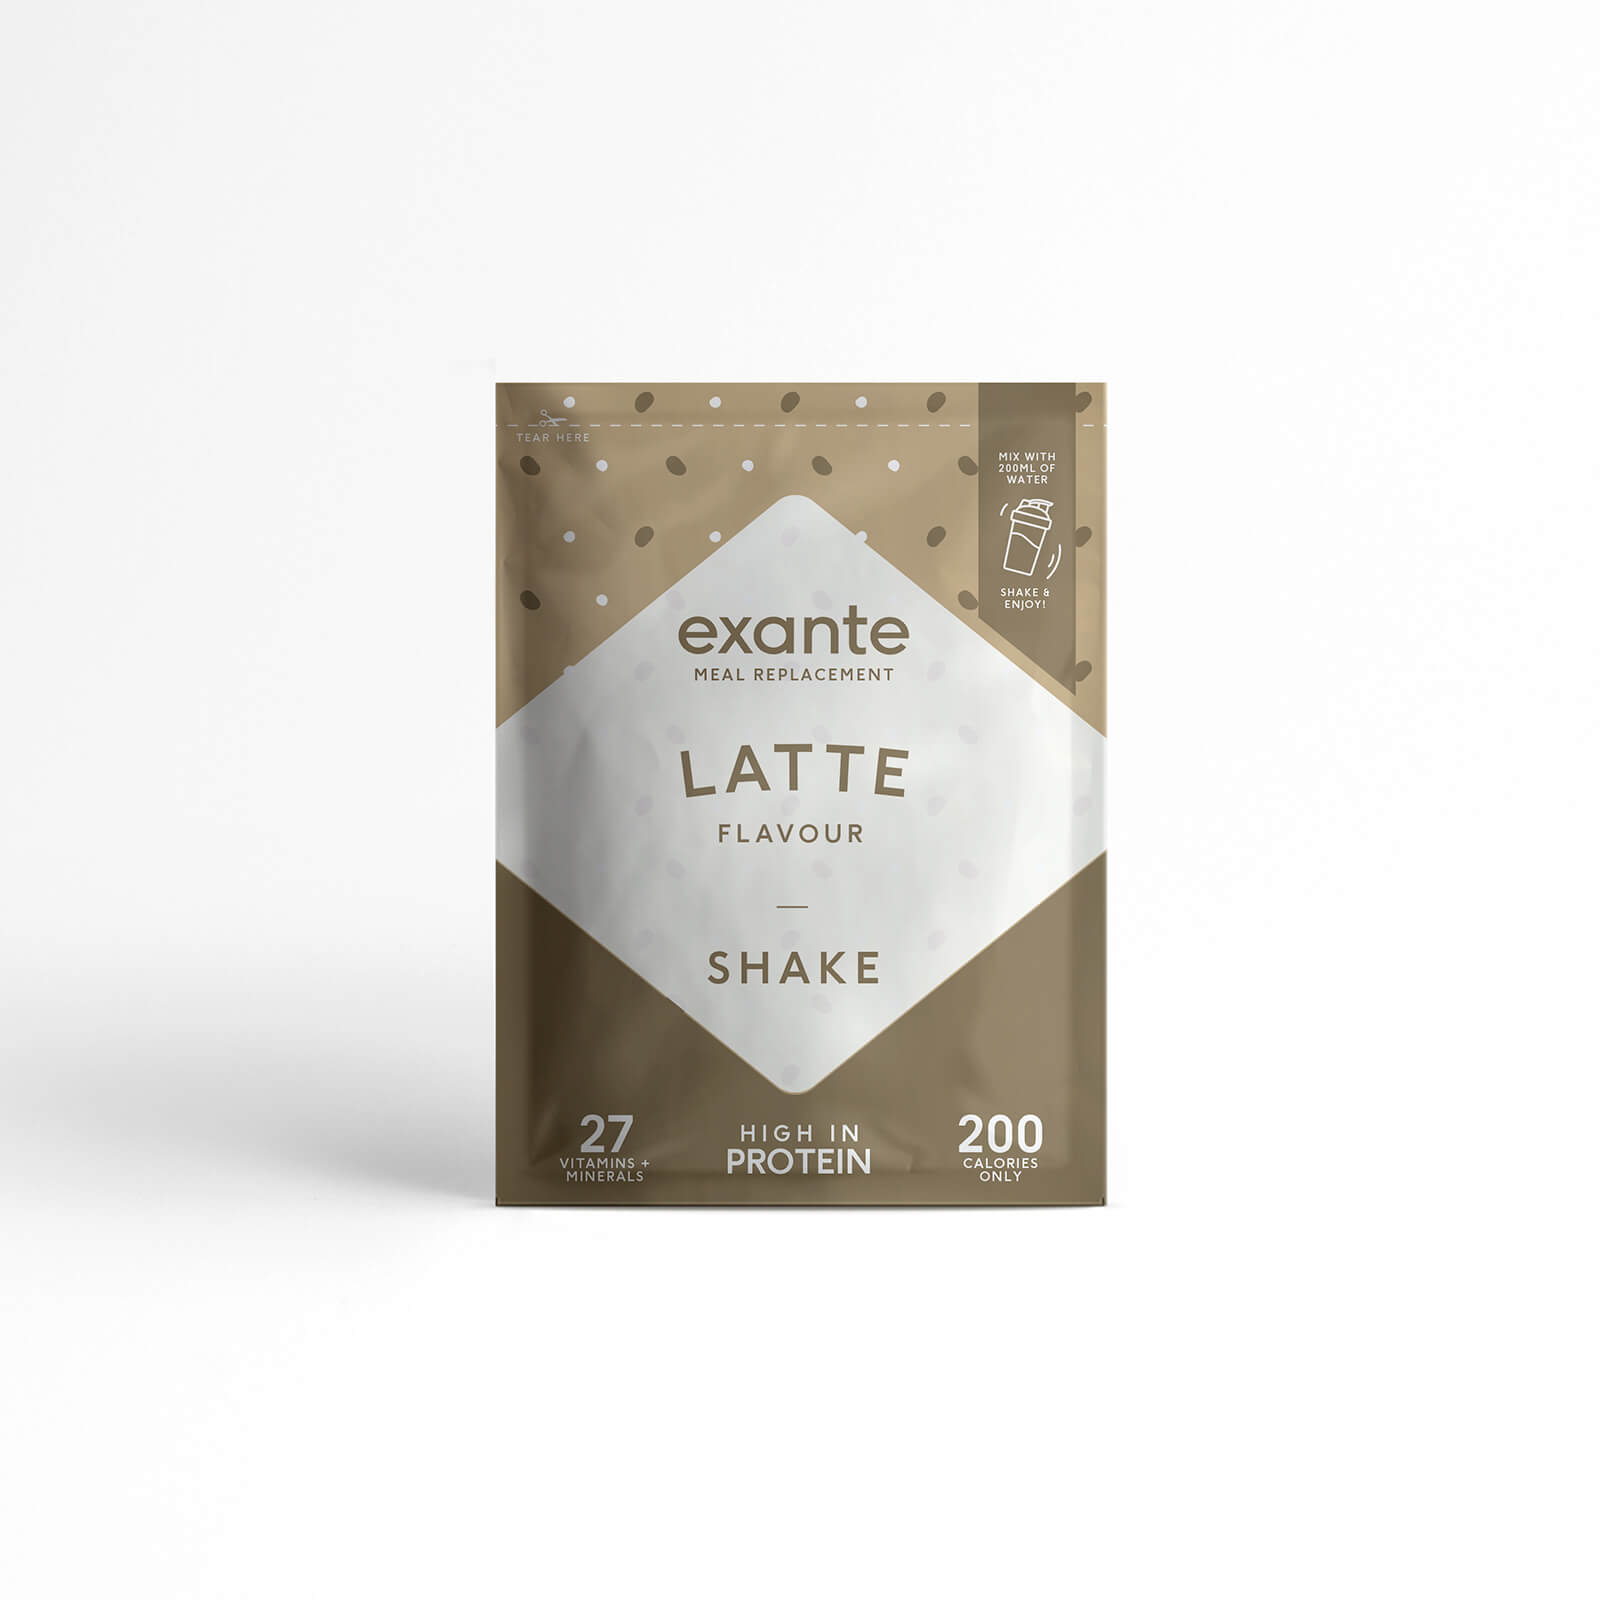 Exante Diet Meal Replacement Latte Shake